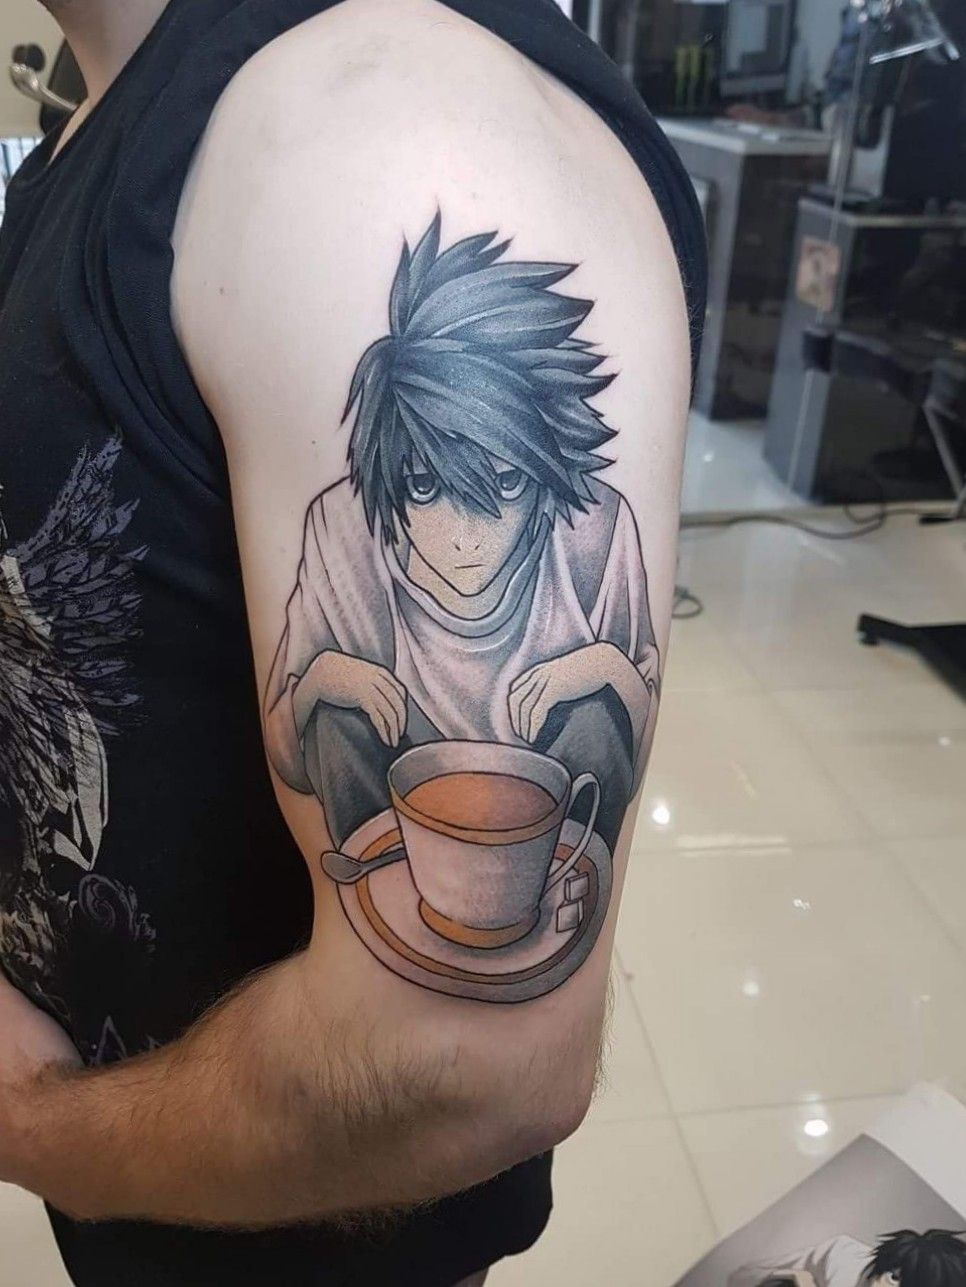 my death note tattoo  rdeathnote